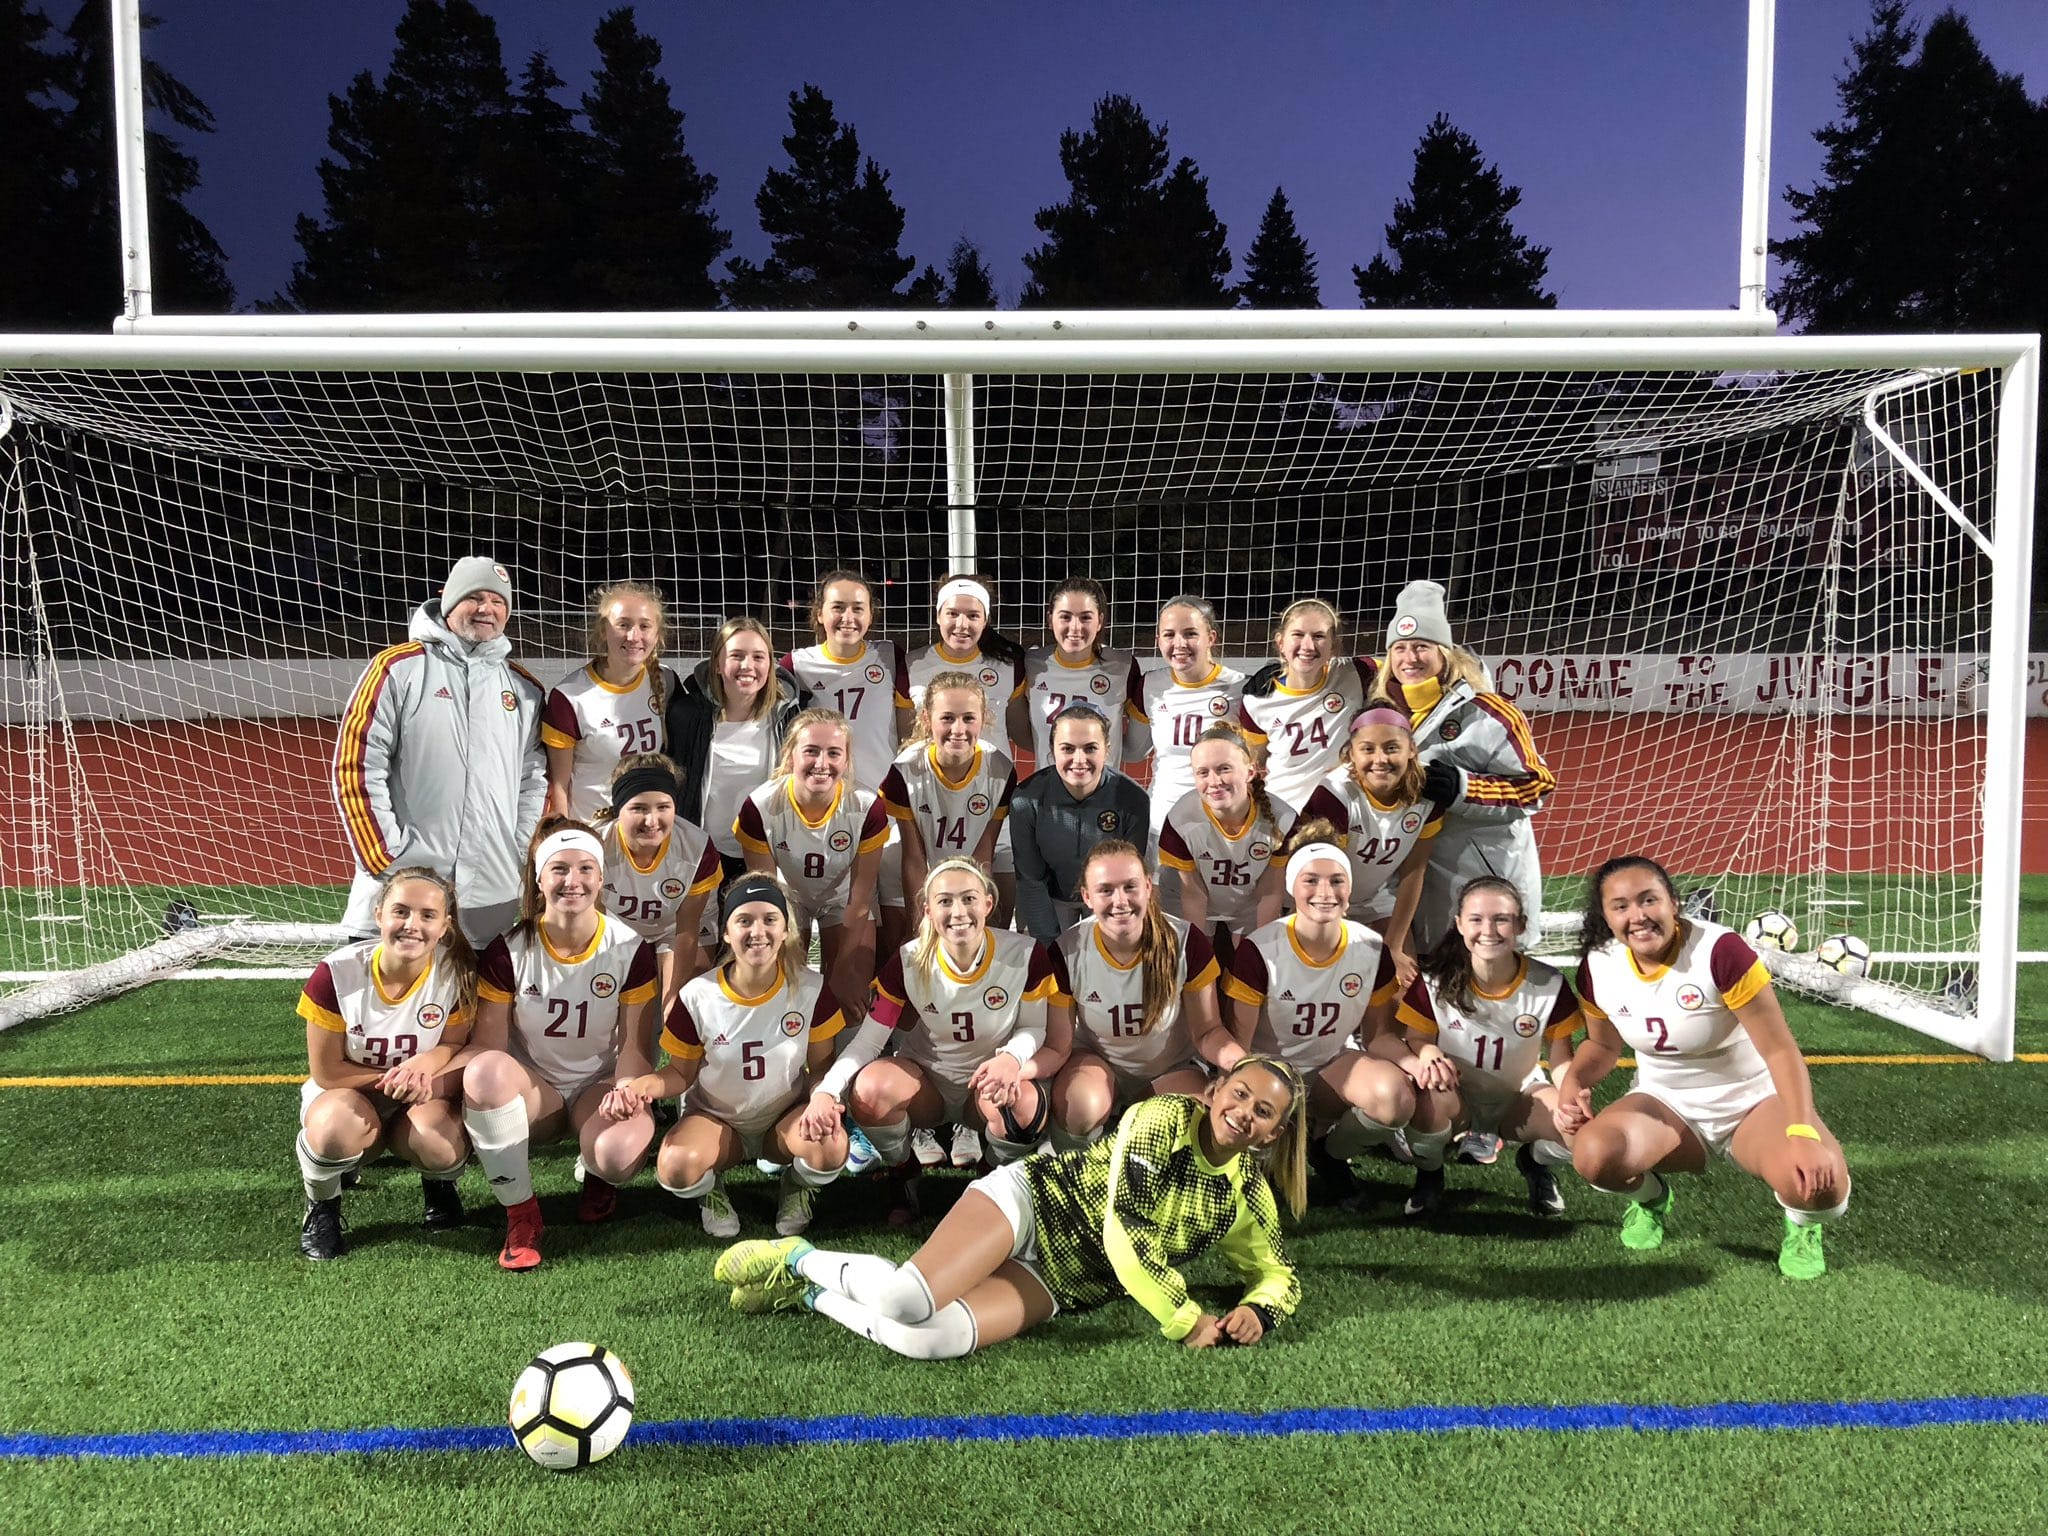 The Prairie girls soccer team pose for a team photo after beating Mercer Island in the 3A state quarterfinals (Photo courtesy of Prairie High School soccer team)